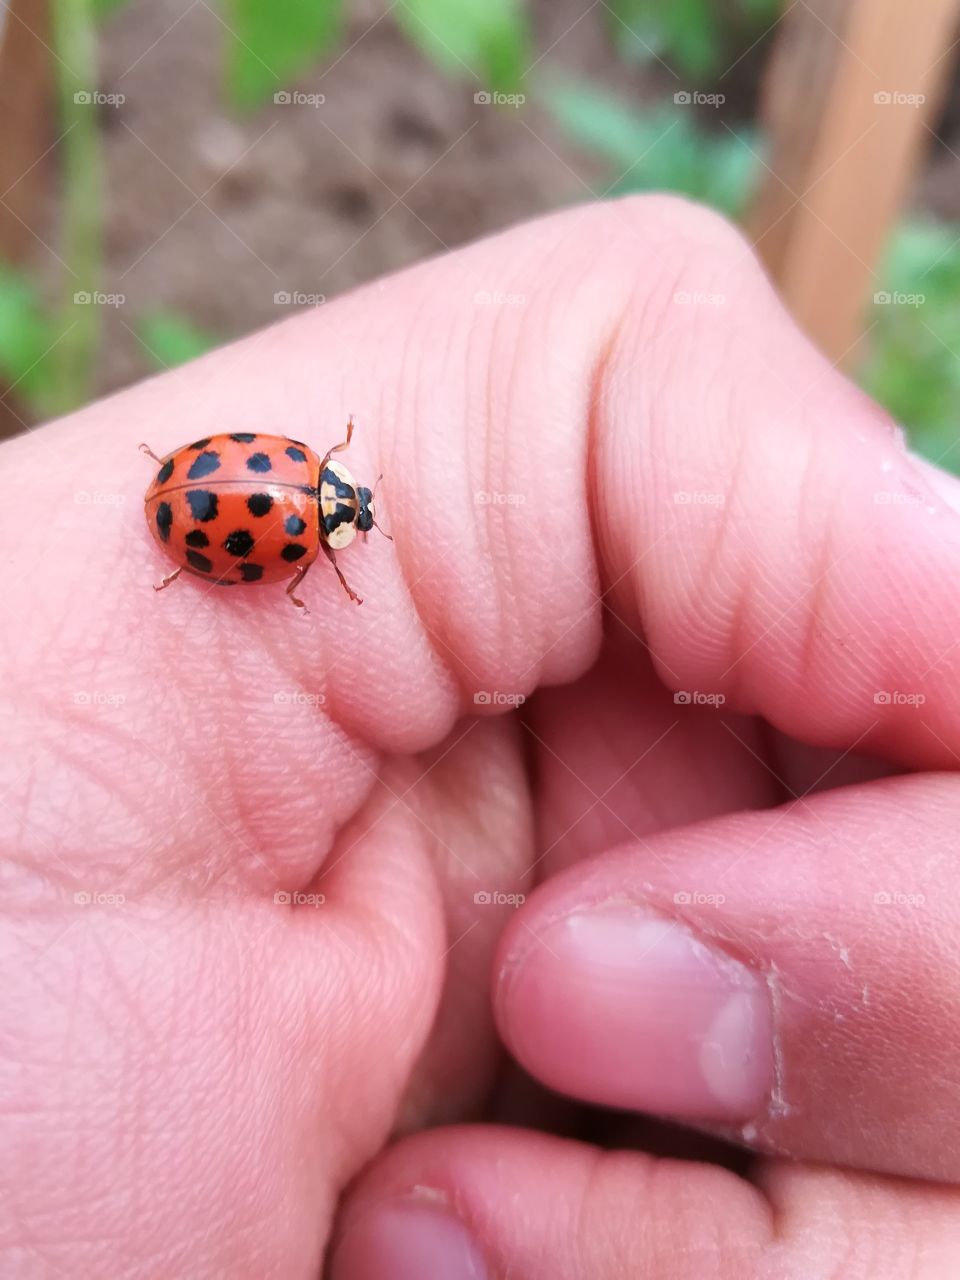 They say ladybugs are a sign of good luck. 